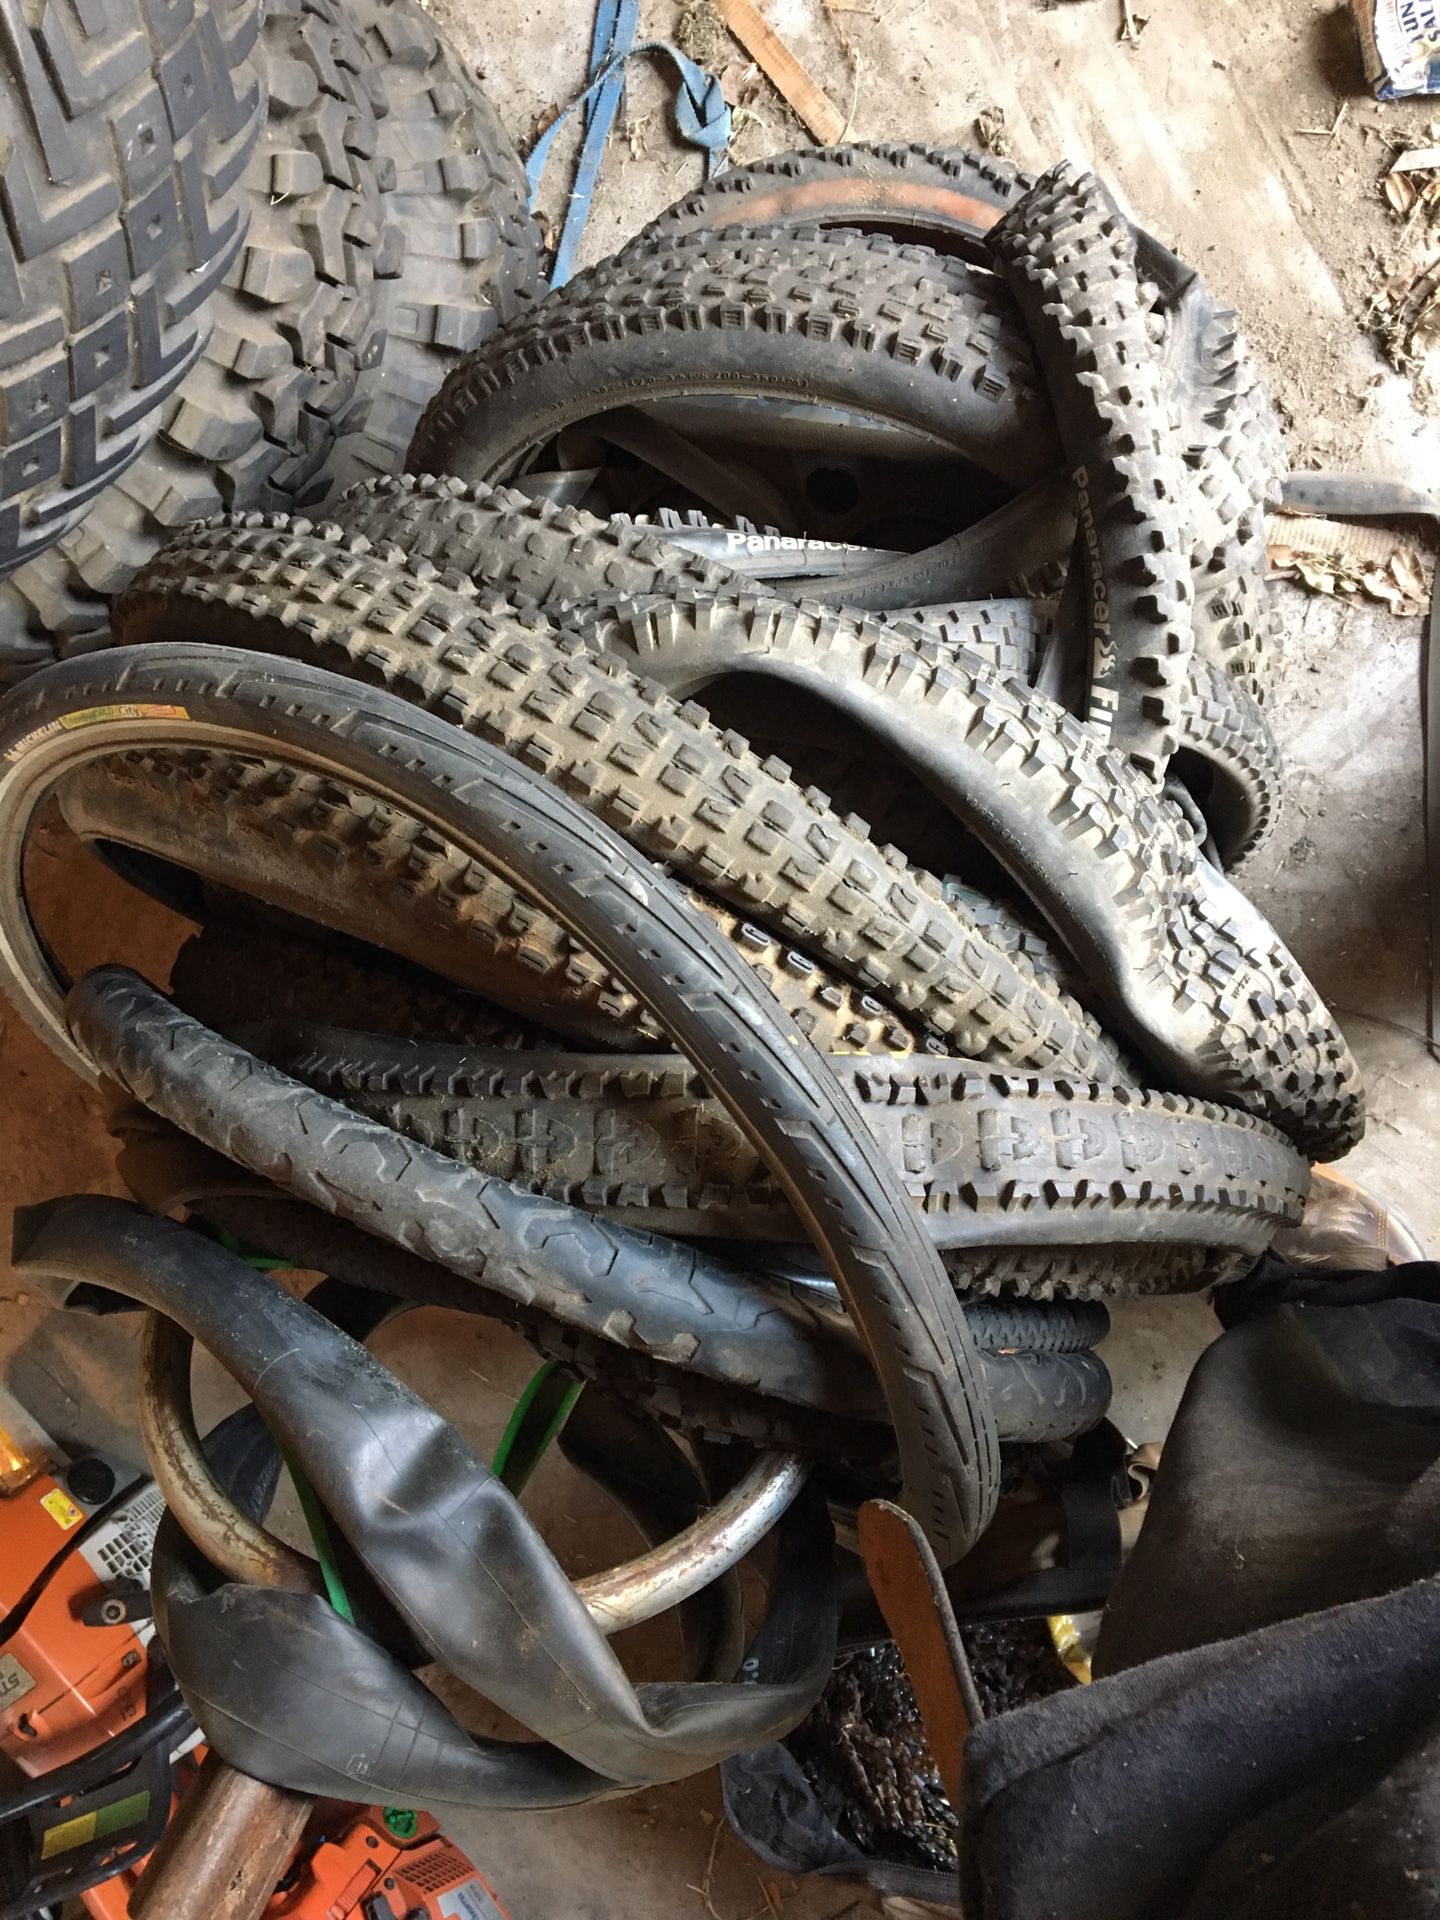 Bike tires mtb bmx road. Also have tons of complete rims and bike frames and parts